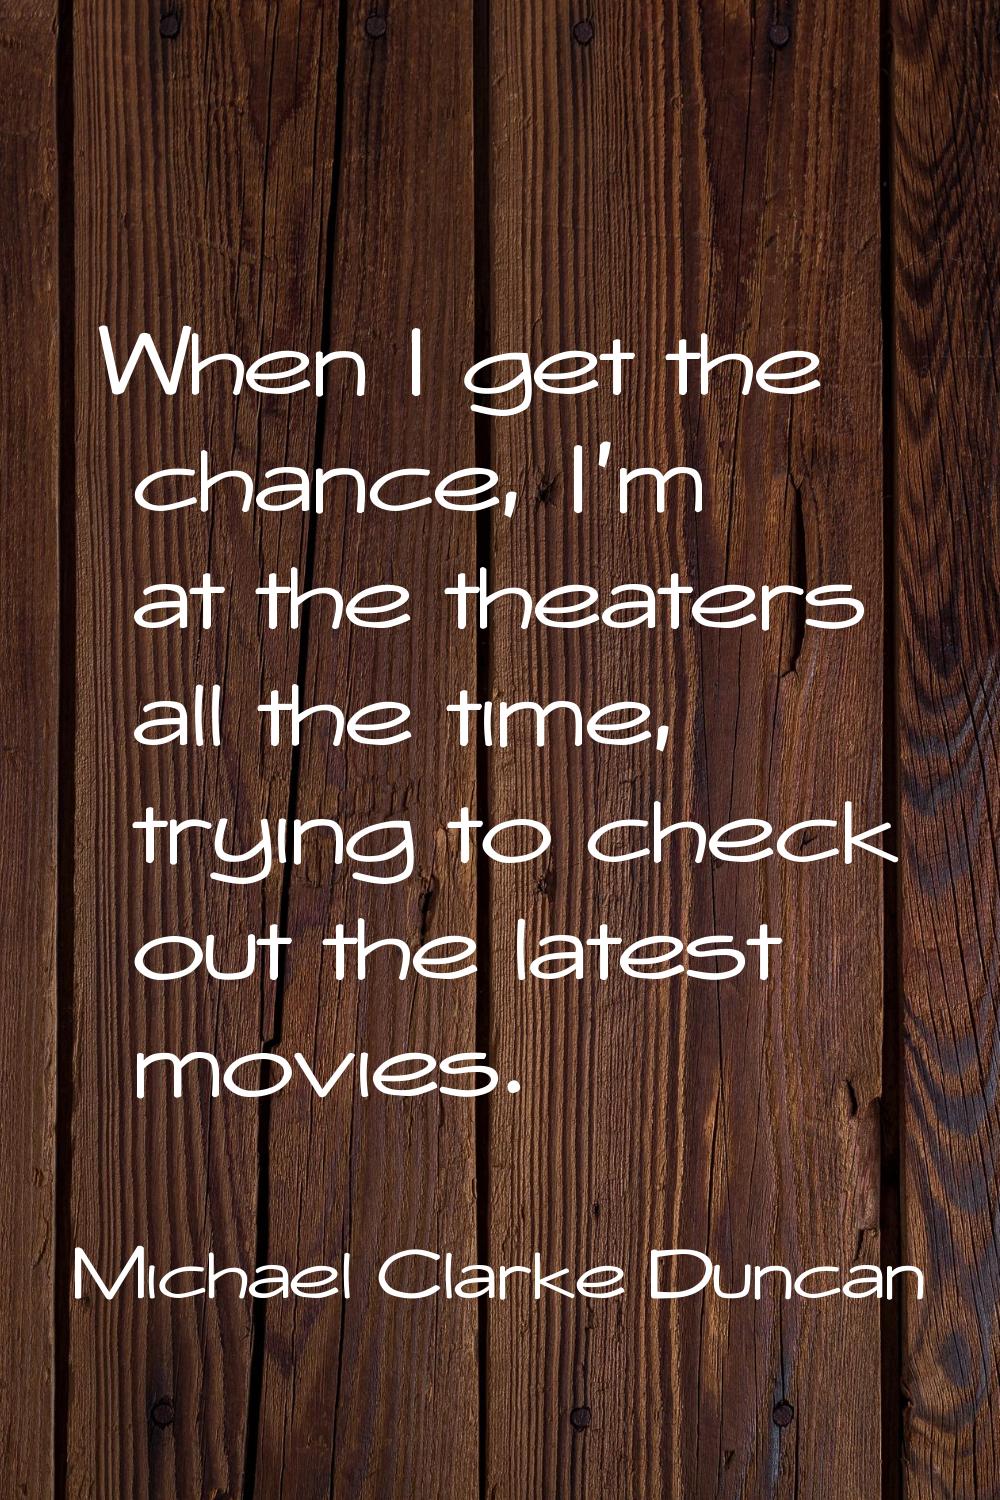 When I get the chance, I'm at the theaters all the time, trying to check out the latest movies.